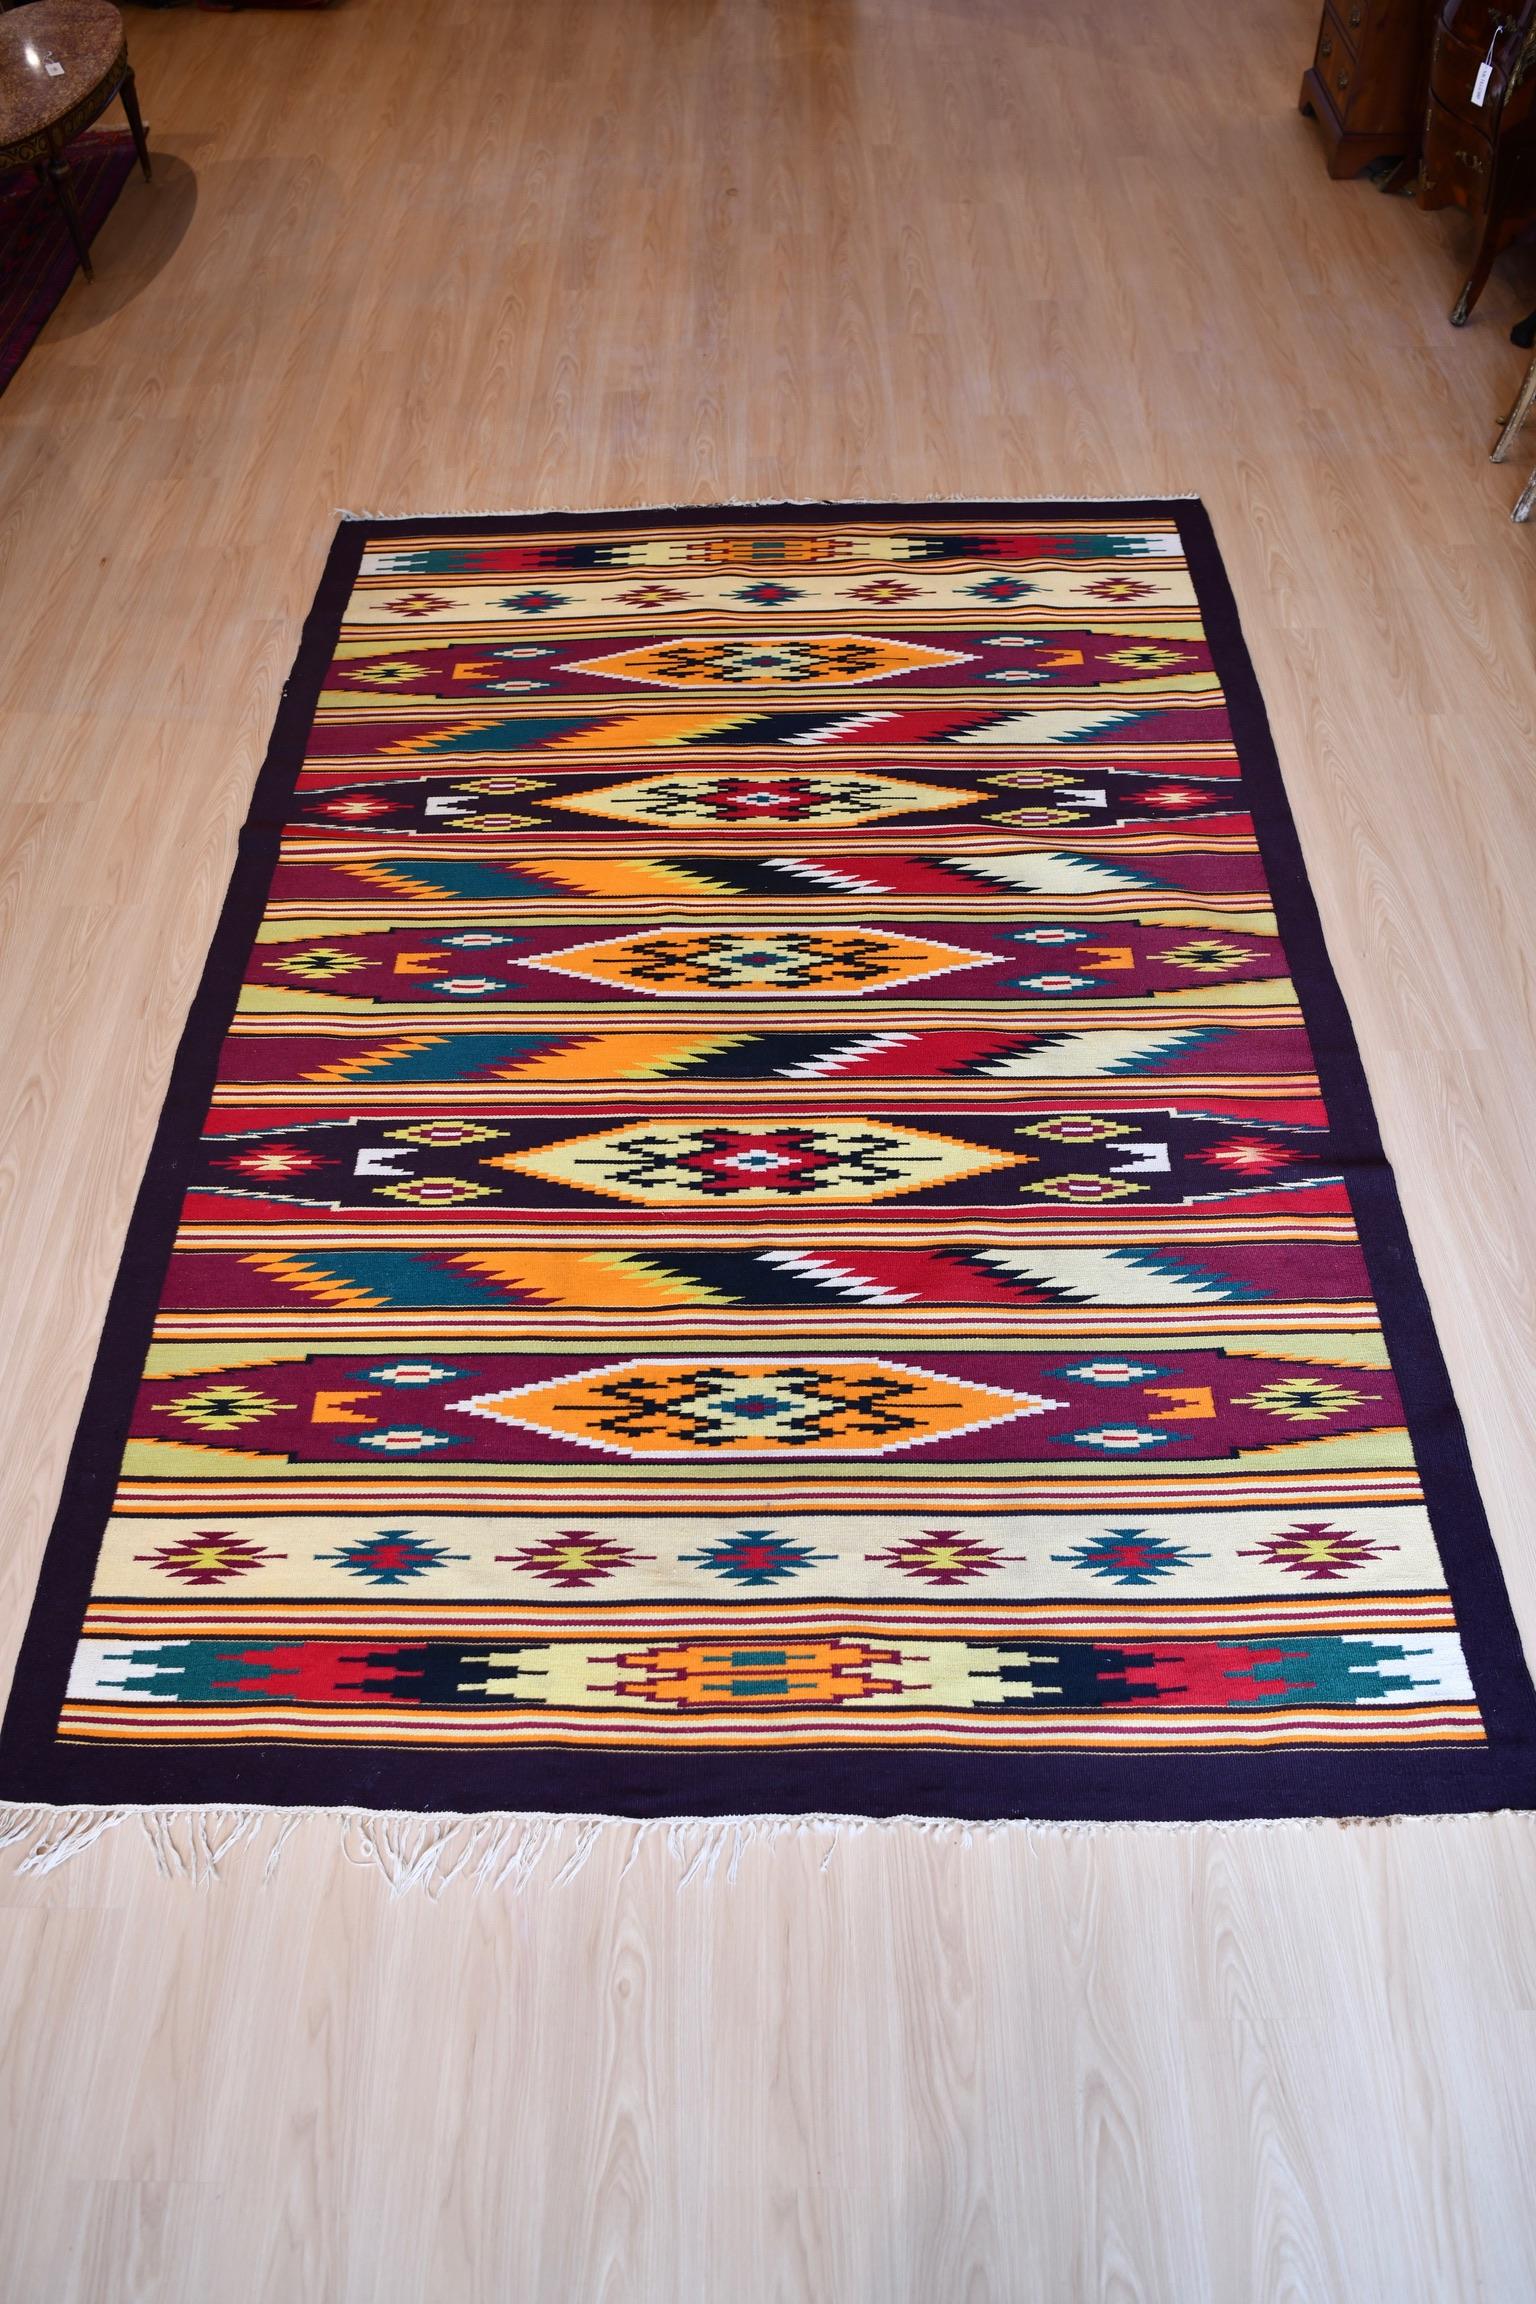 Large vintage Rio Grande blanket with colorful geometric decoration. Dimensions: 117